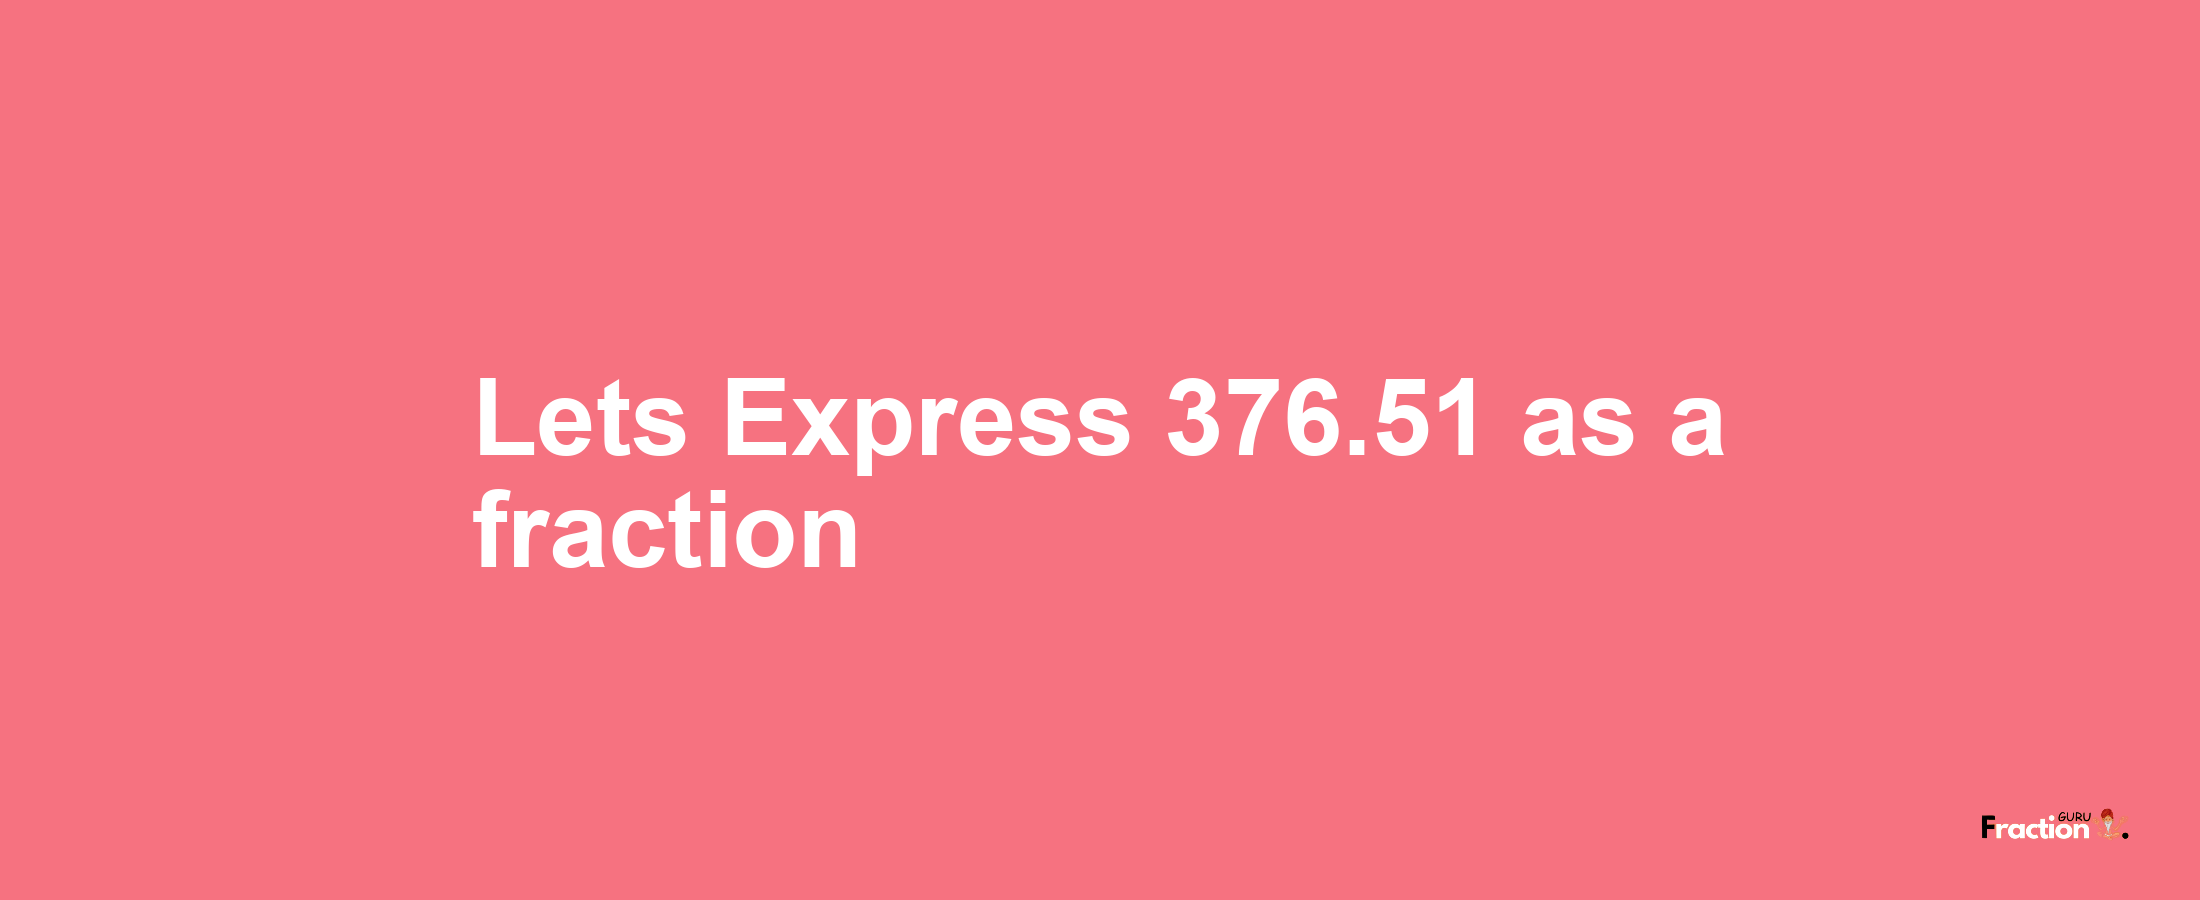 Lets Express 376.51 as afraction